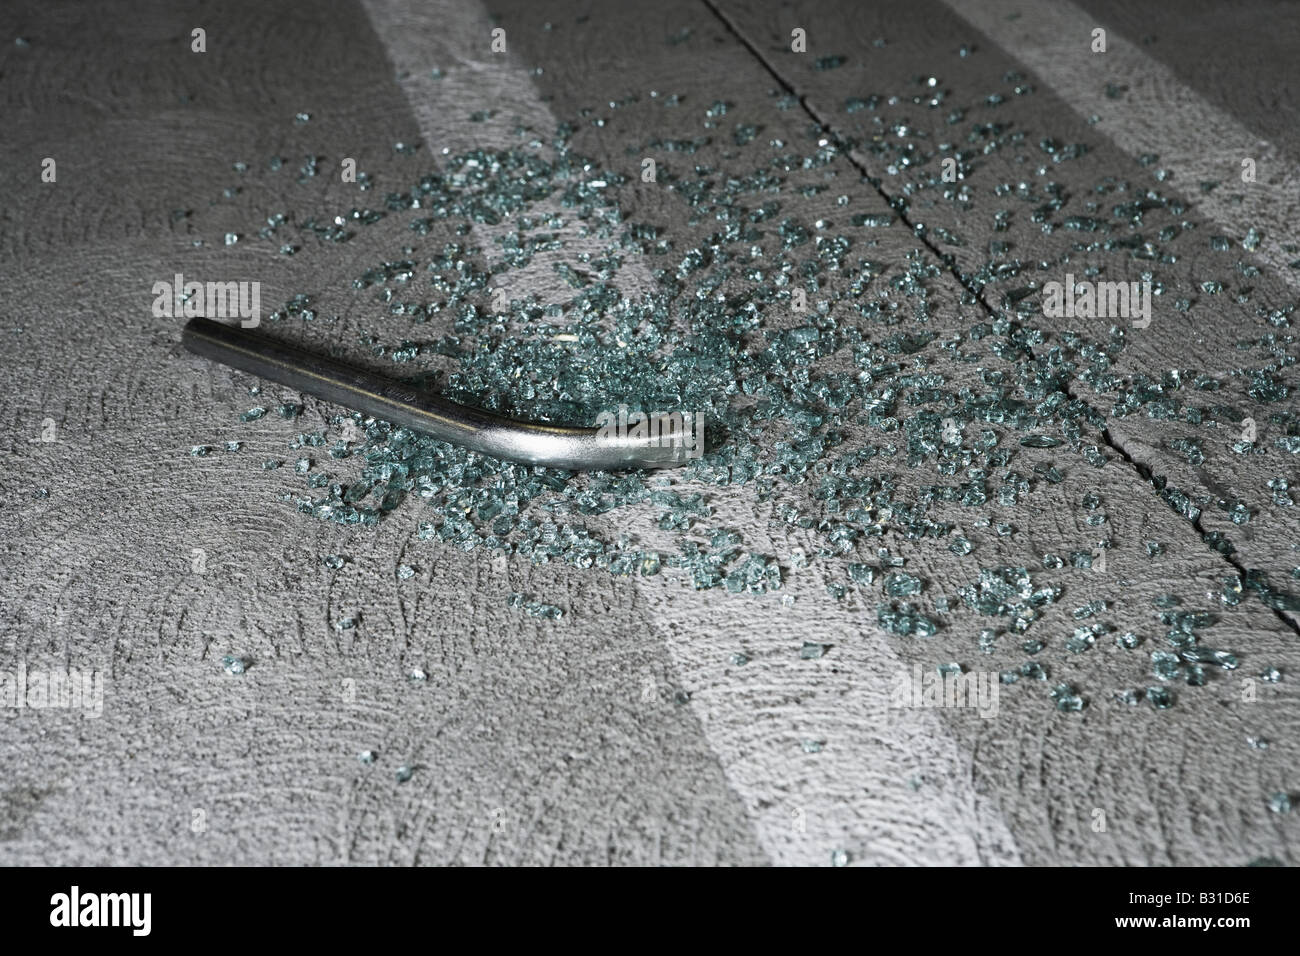 Crowbar and broken glass in car park Stock Photo - Alamy